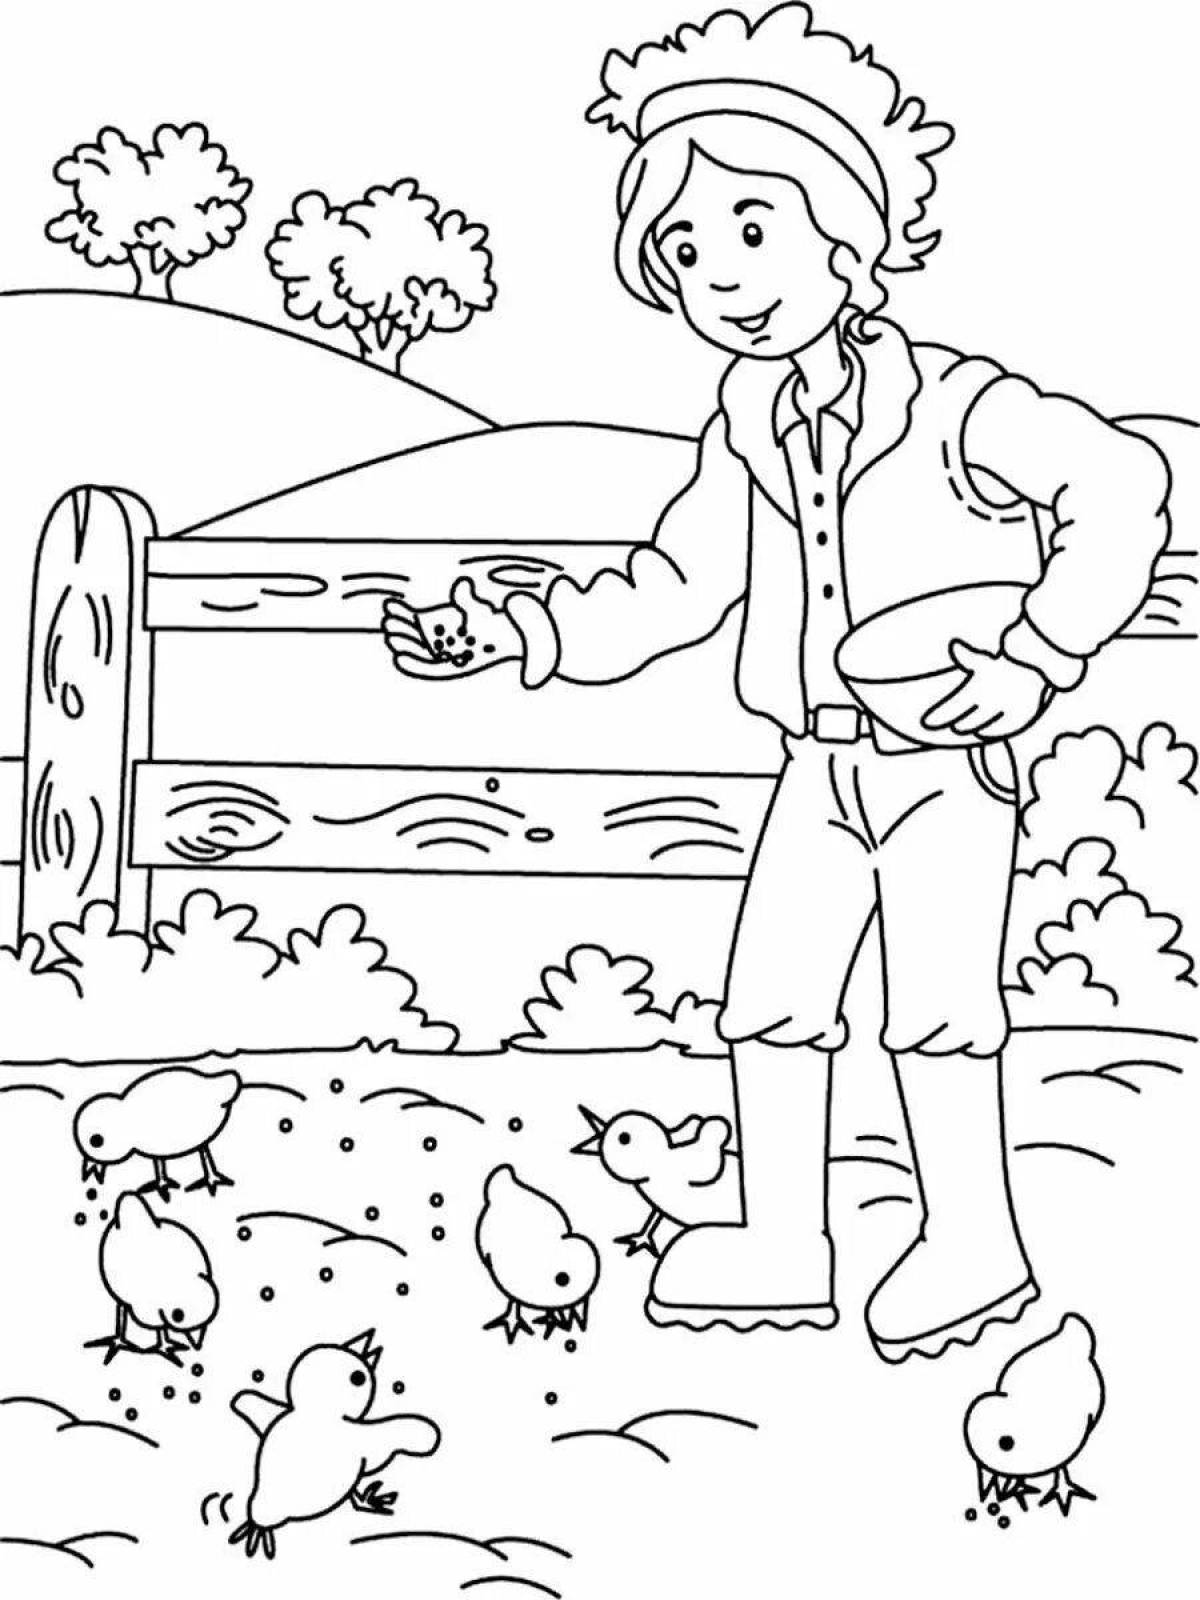 Joyful agriculture coloring page